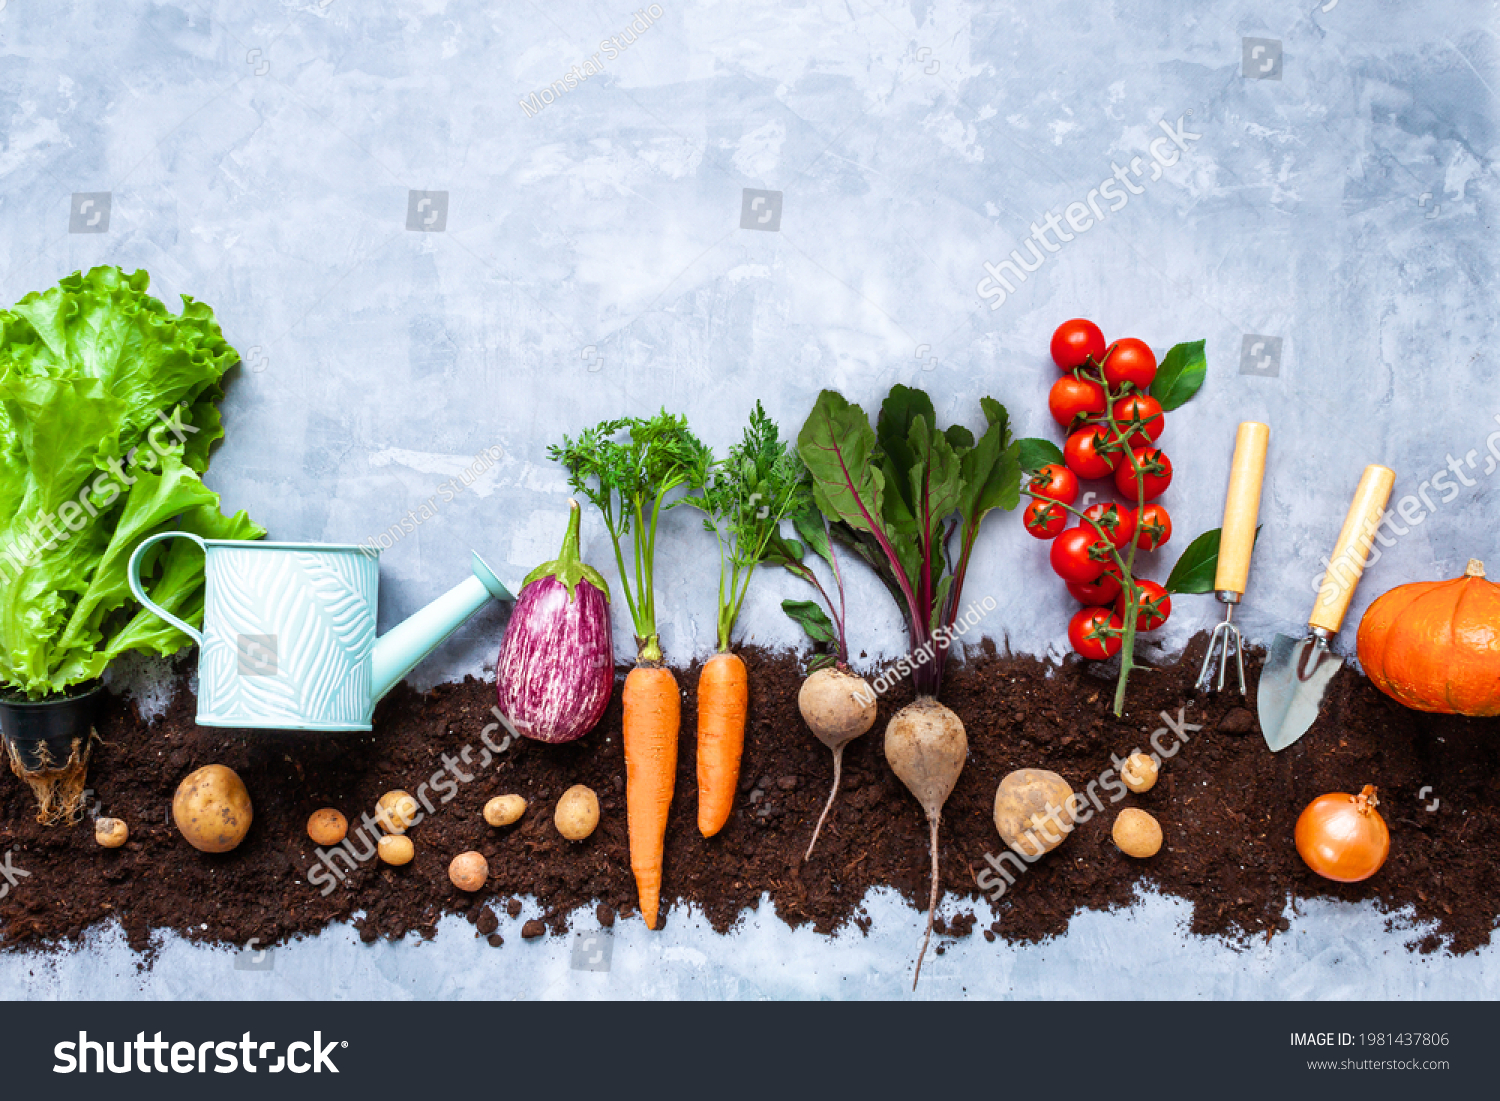 Natural juicy healthy carrot, beet, potato, onion, tomato, greens seedlings are planted on black earth bed. Urban vegetable garden concept. Eco ecological organic vegan food. Autumn harvest. #1981437806